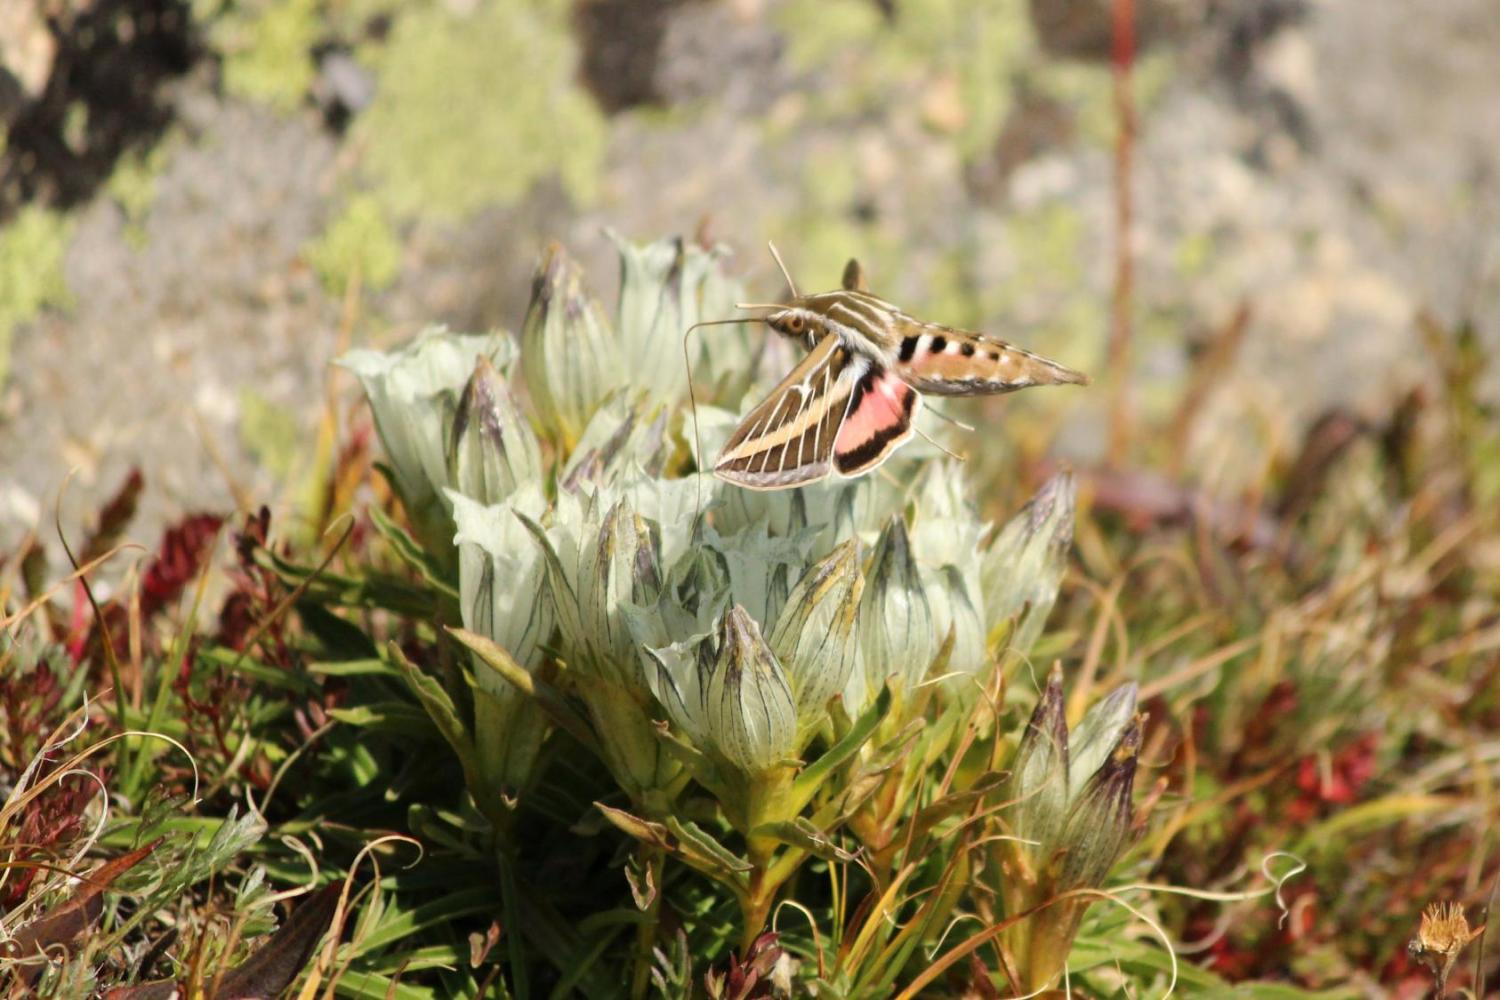 A white-lined sphinx moth